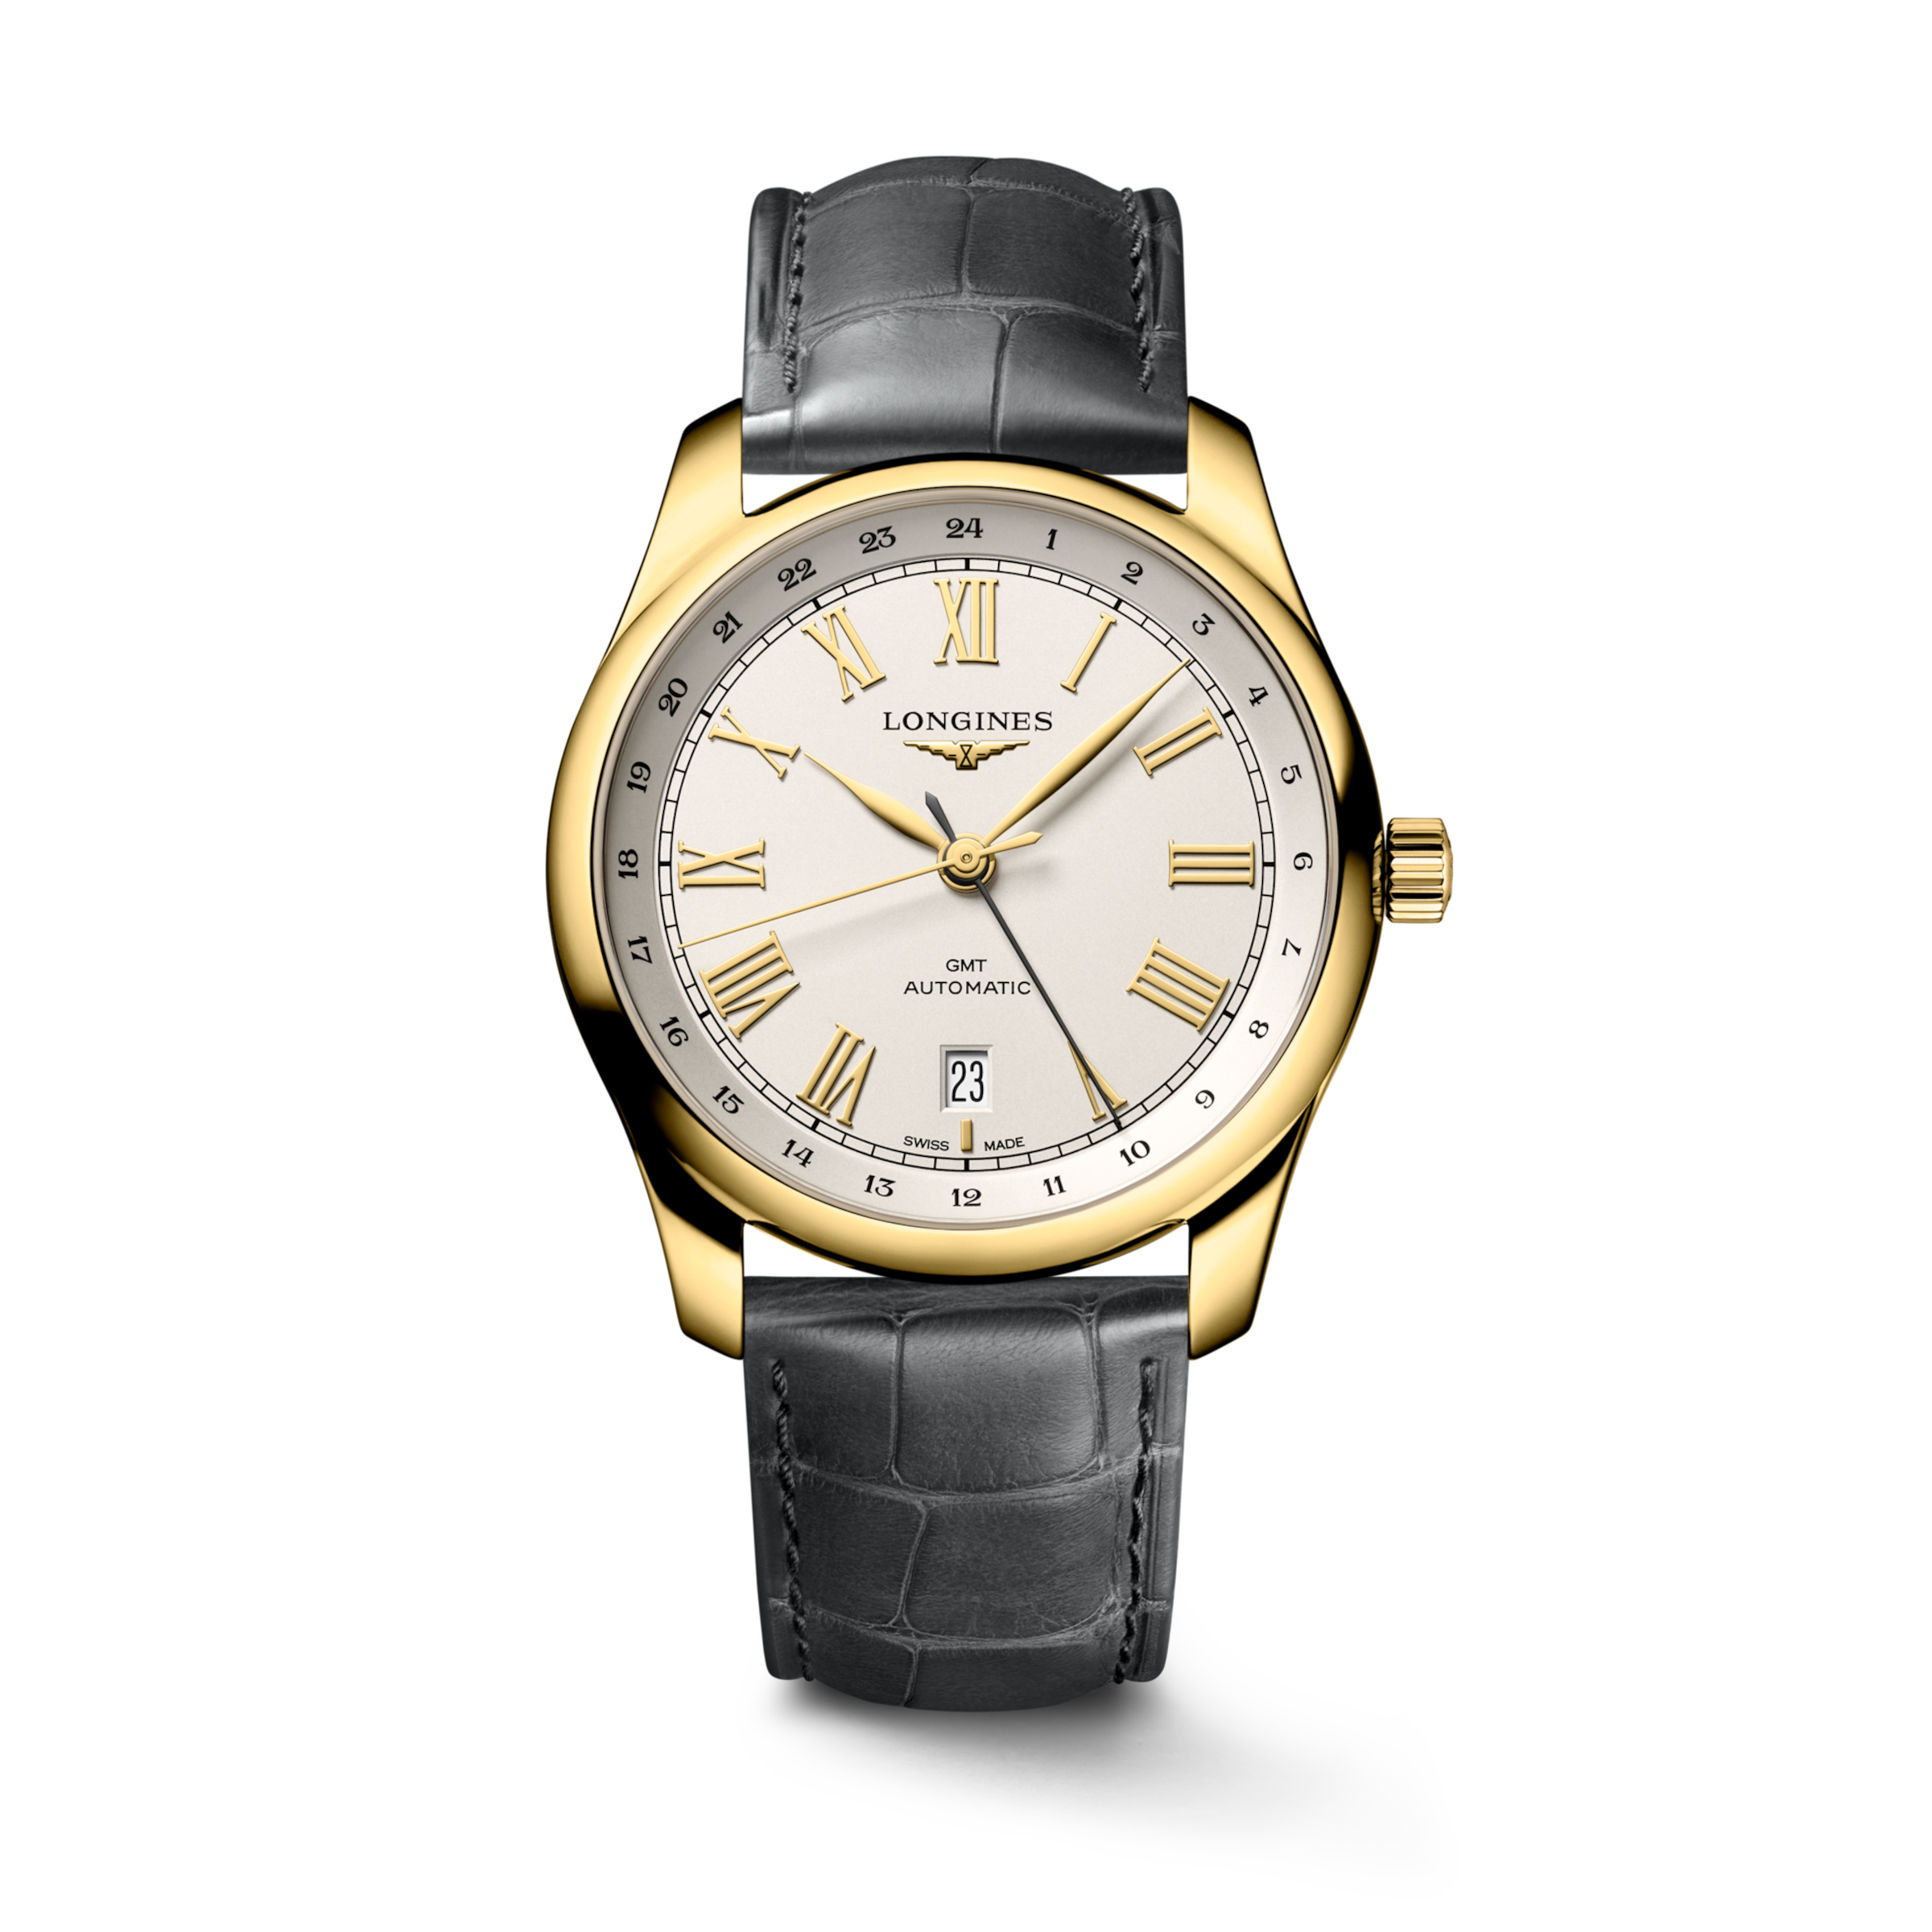 Longines MASTER COLLECTION Automatic 18 karat yellow gold Watch - L2.844.6.71.2